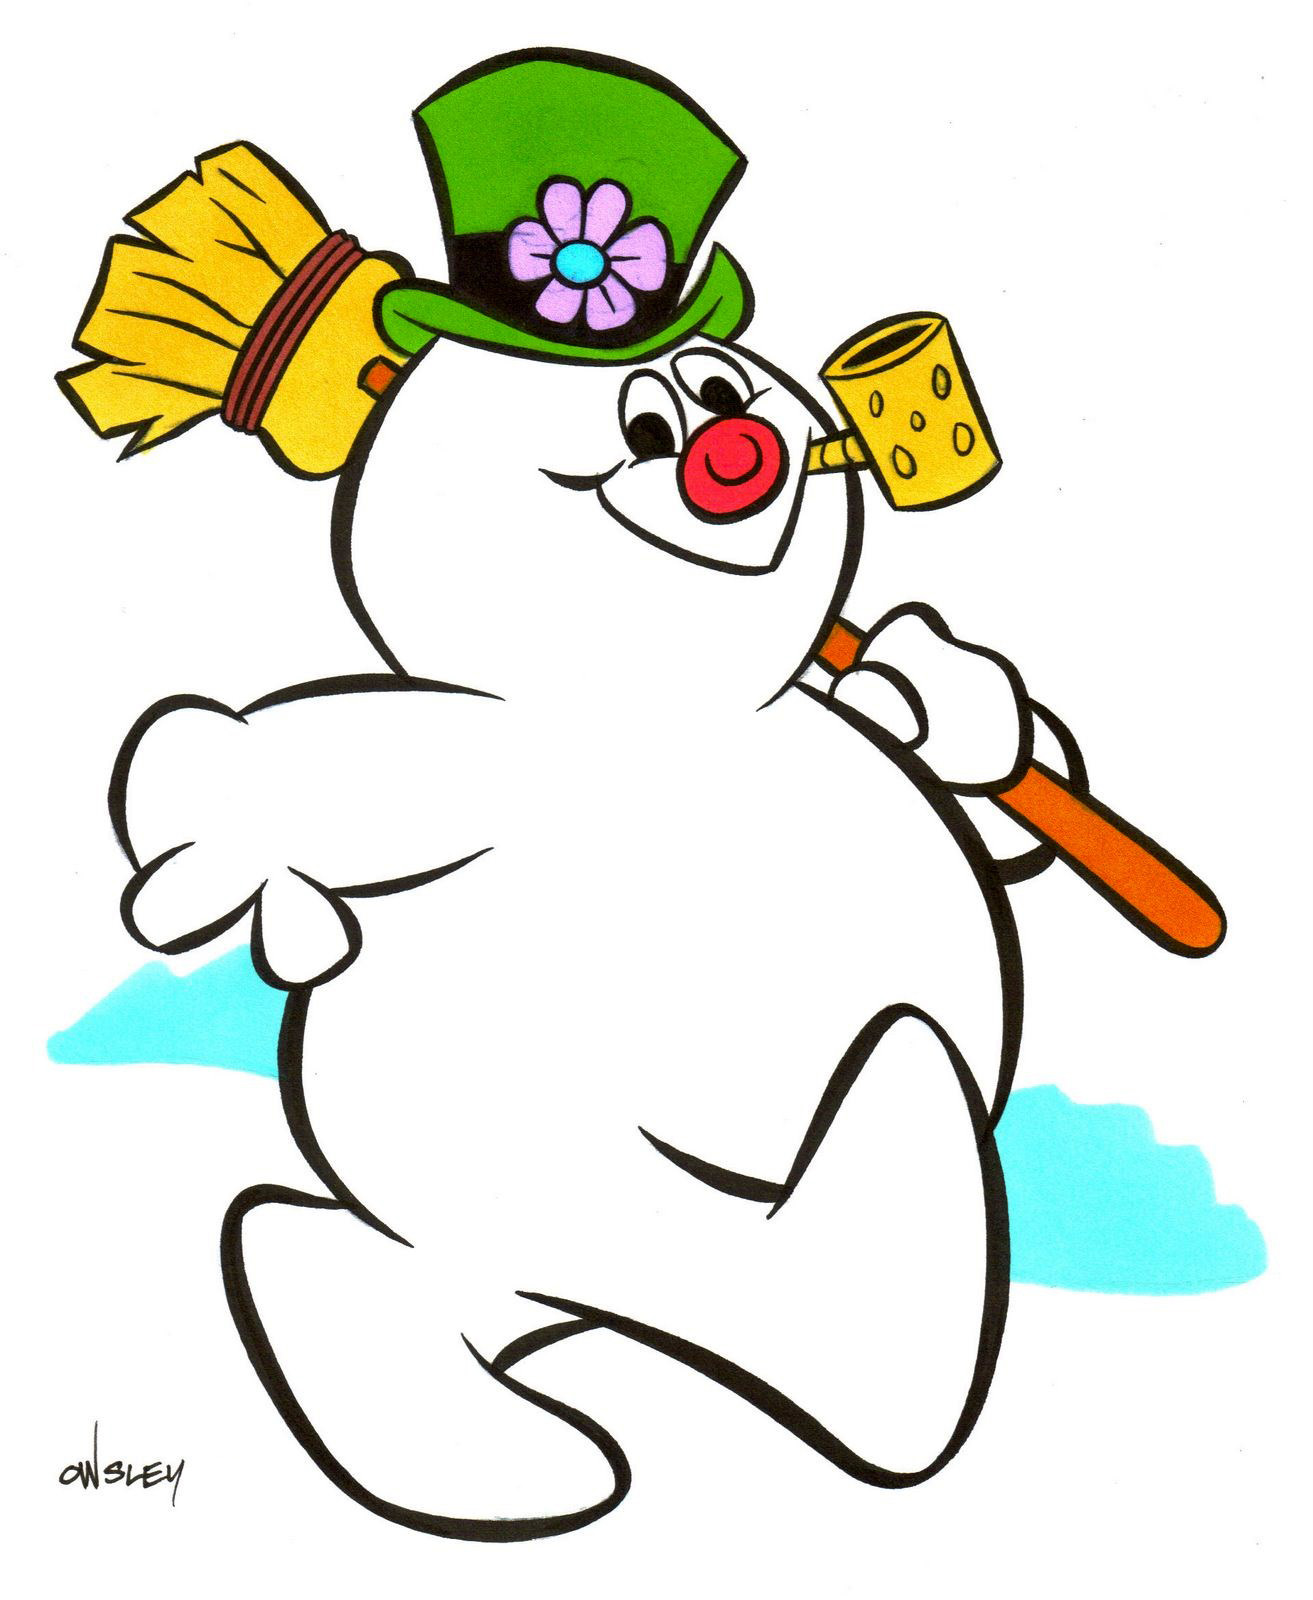     Cartoon Art And More   Frosty The Snowman Original Art Available